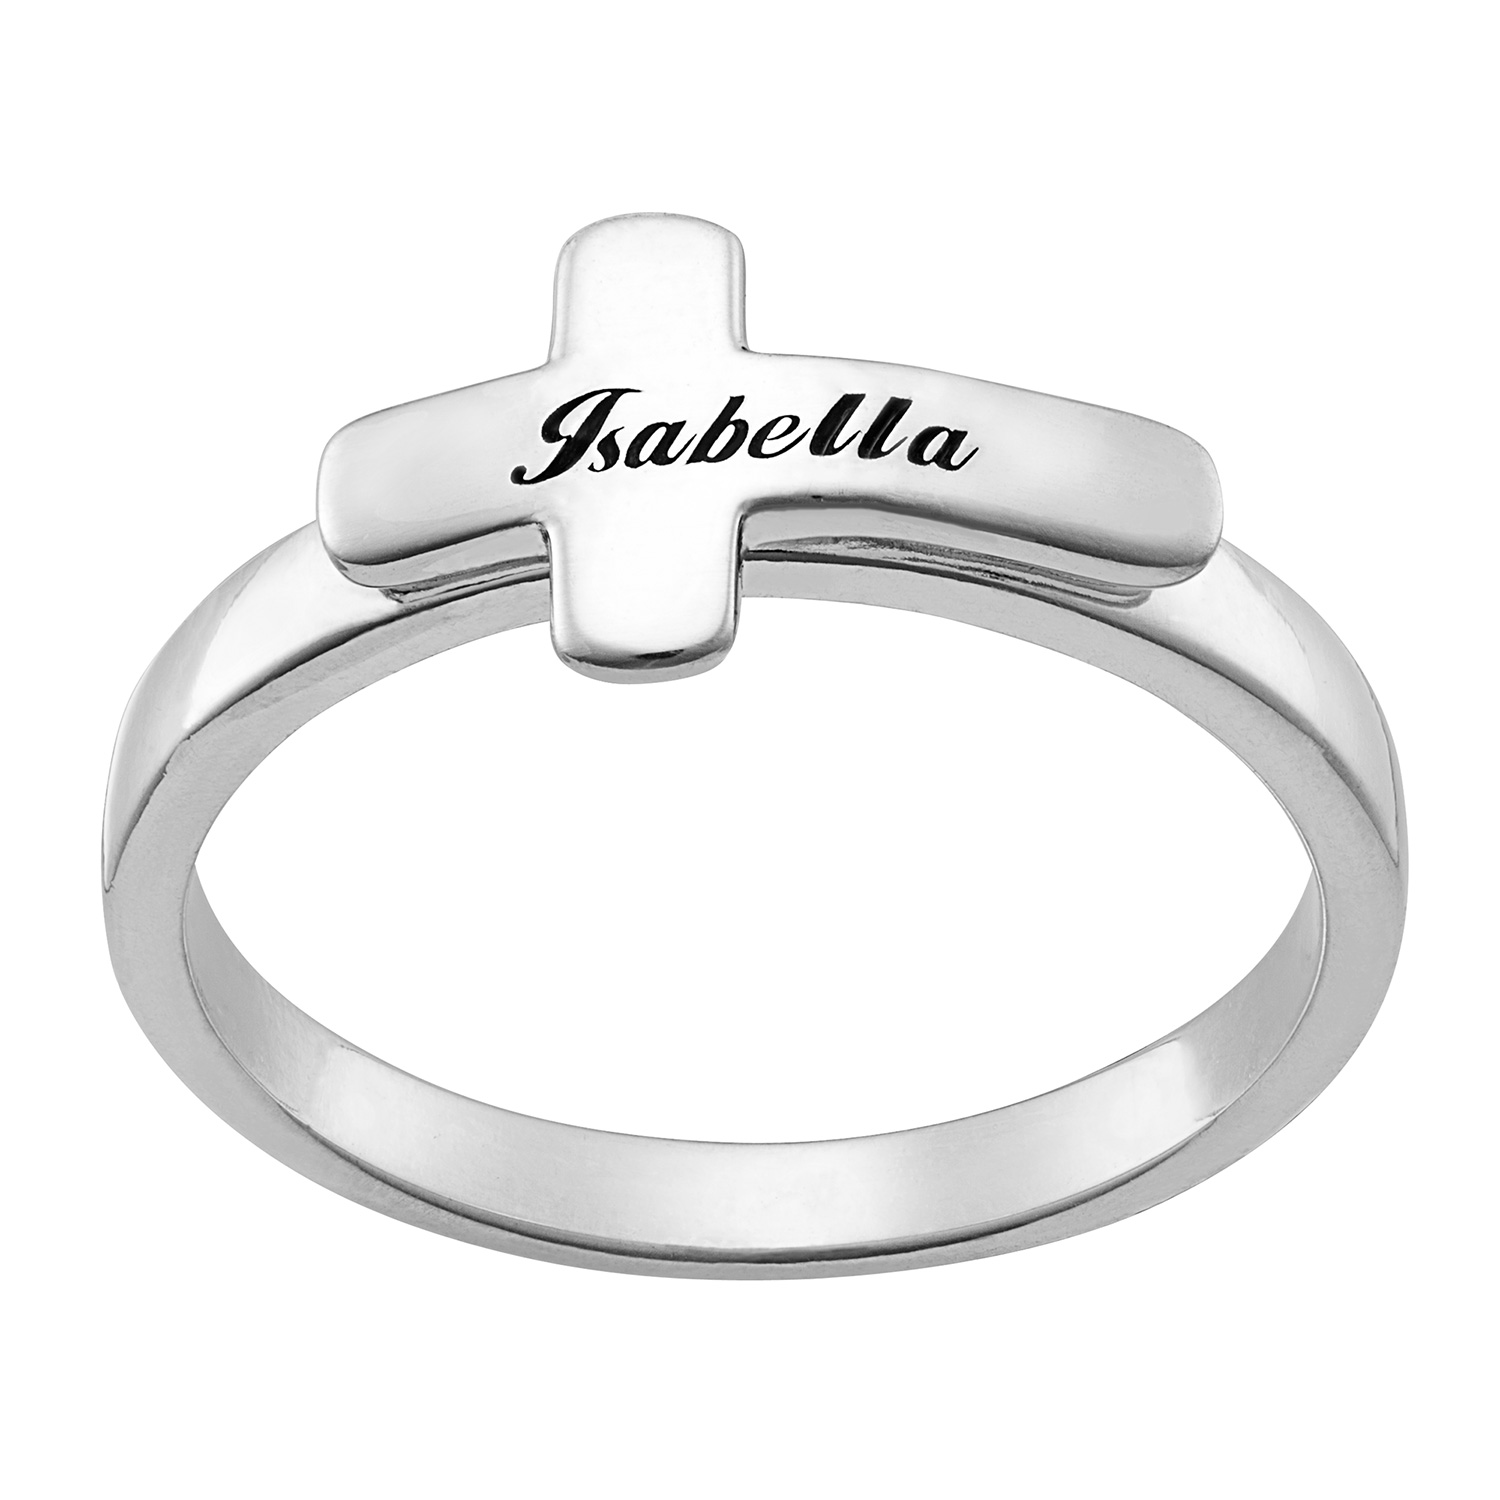 Sterling Silver Engraved Cross Ring